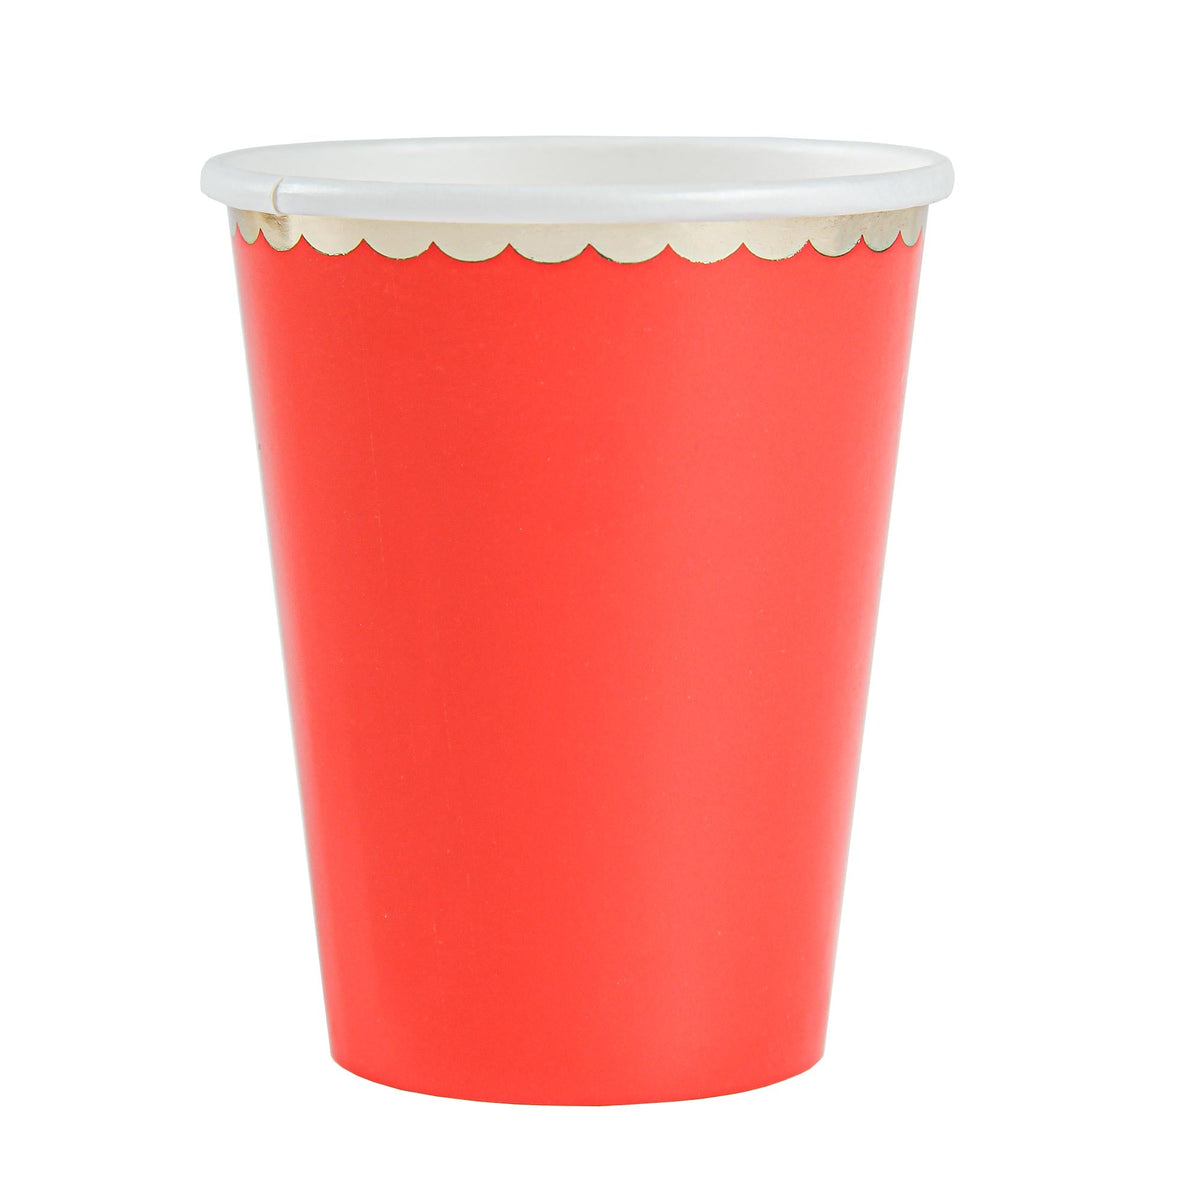 YIWU SANDY PAPER PRODUCTS CO., LTD Everyday Entertaining Red Paper Cups, 9 oz, 8 Count